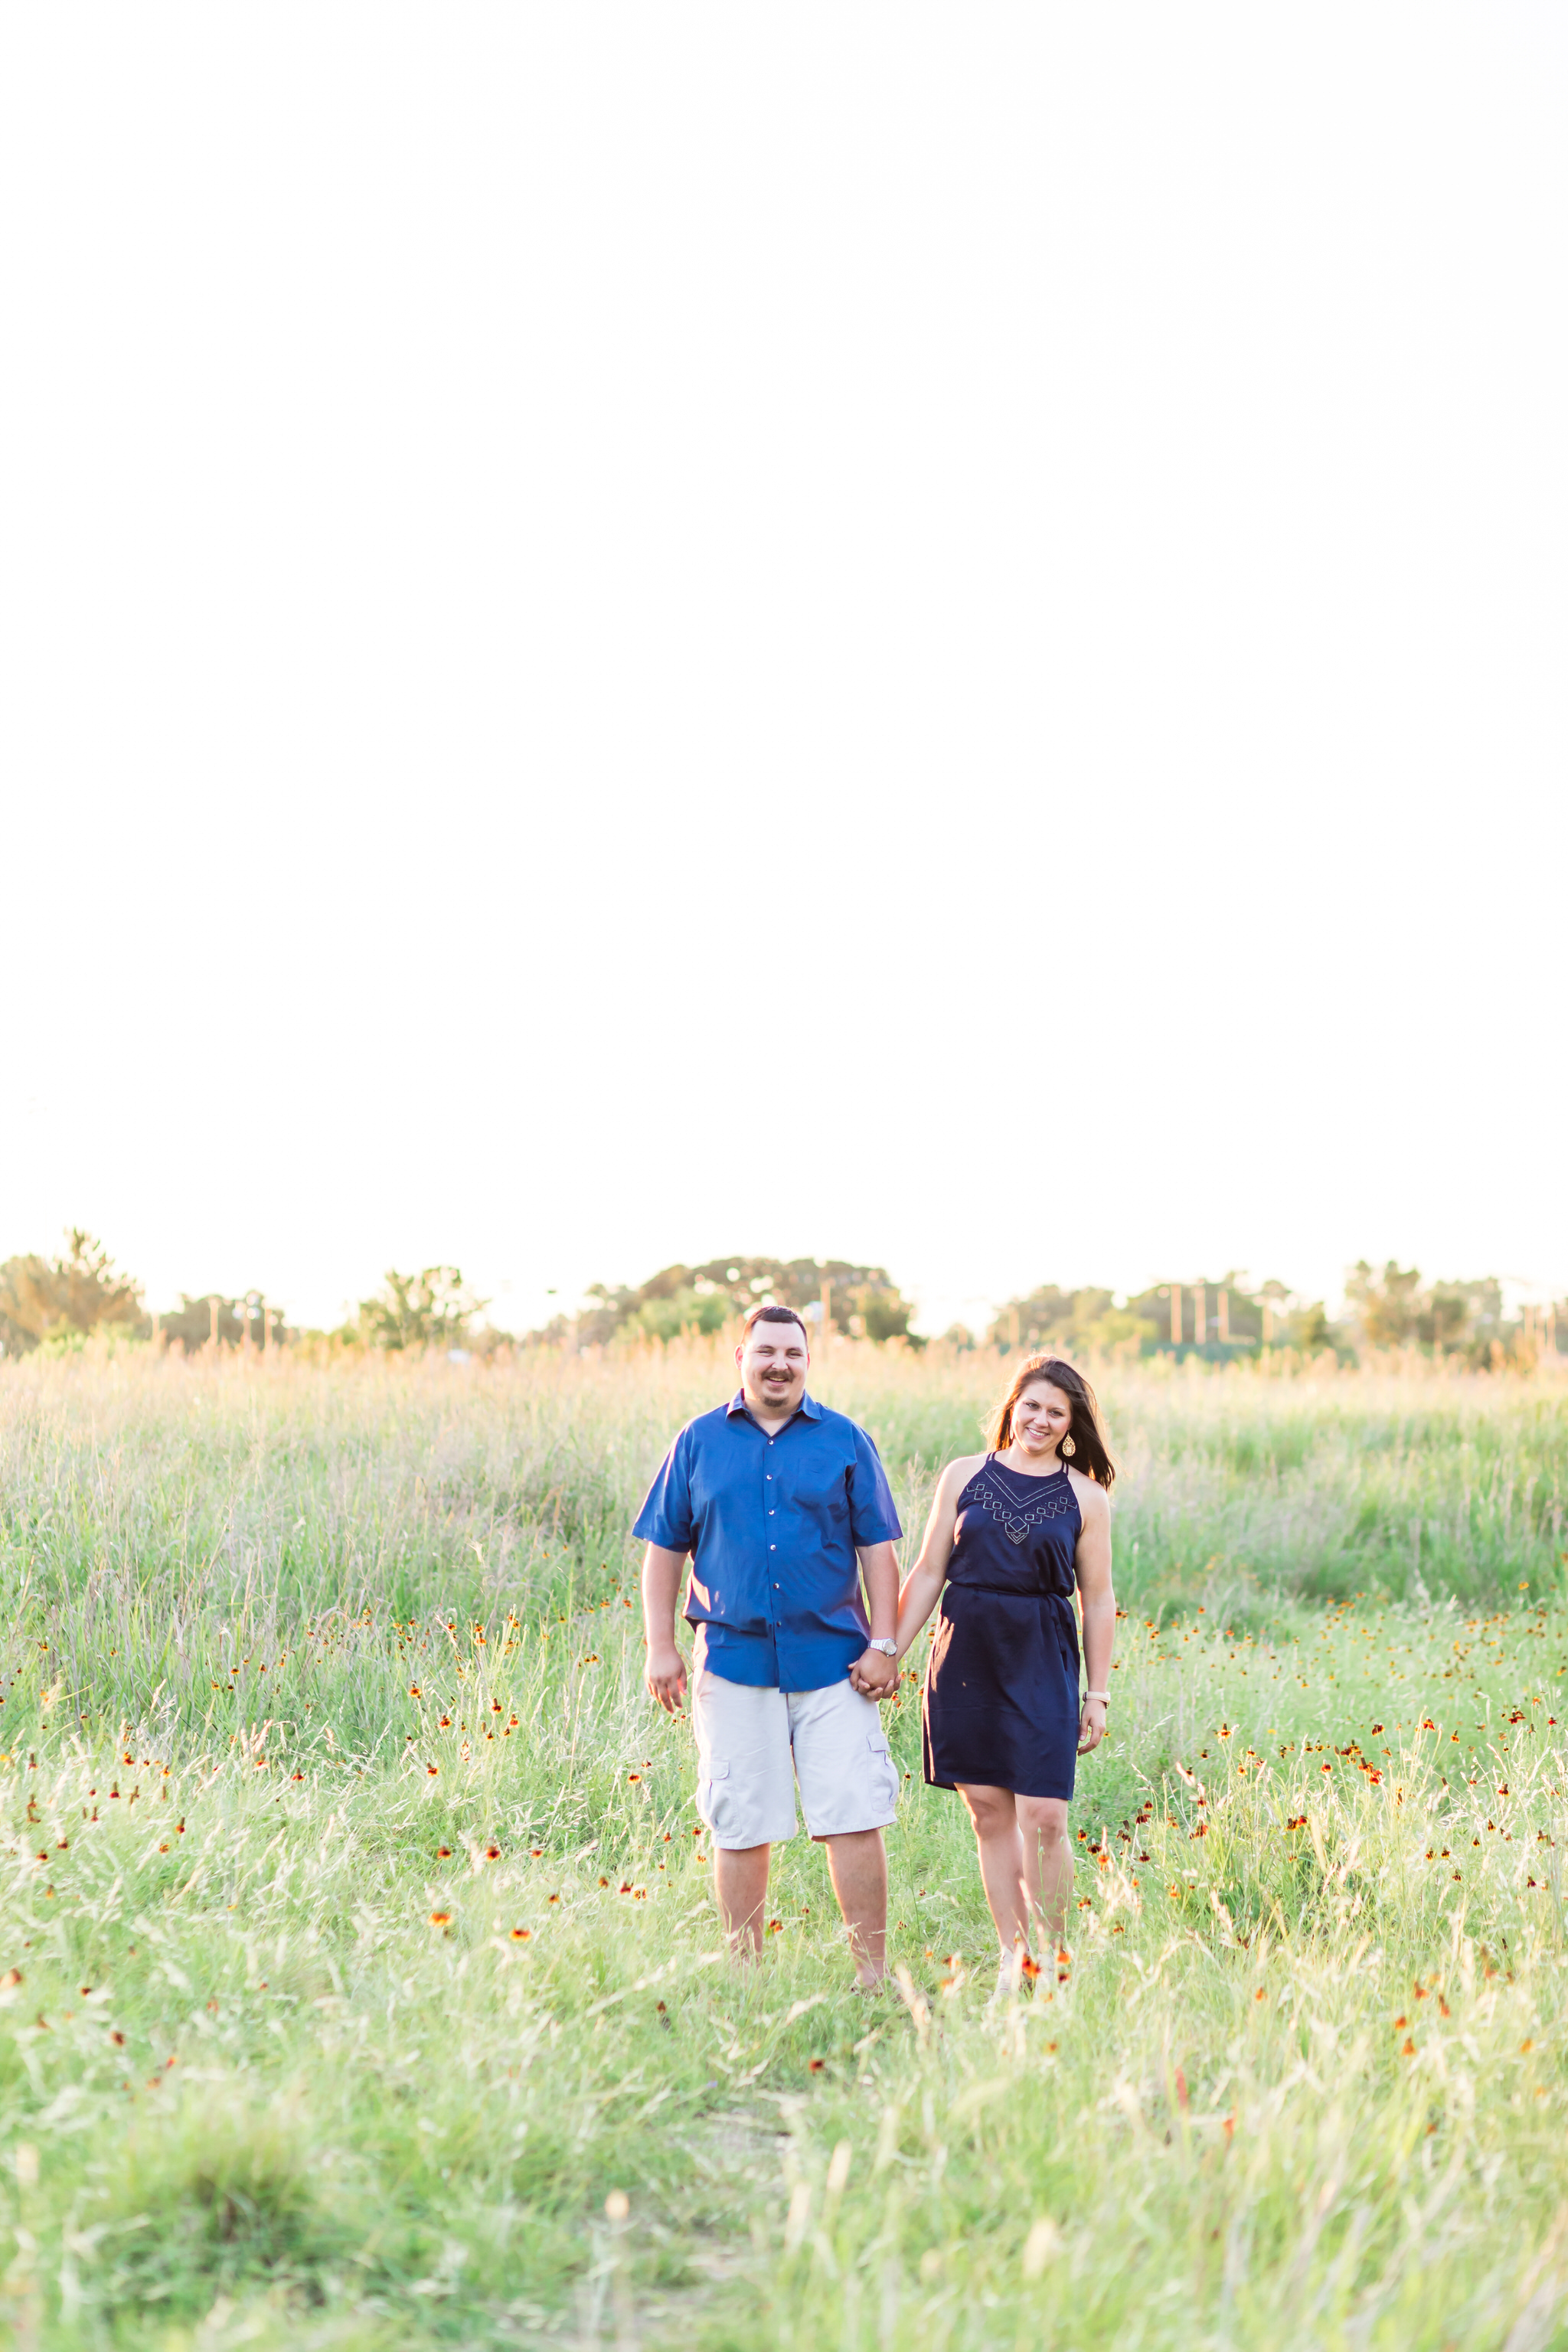 A Summer Engagement Session at Cibolo Nature Center in Boerne, TX by Dawn Elizabeth Studios